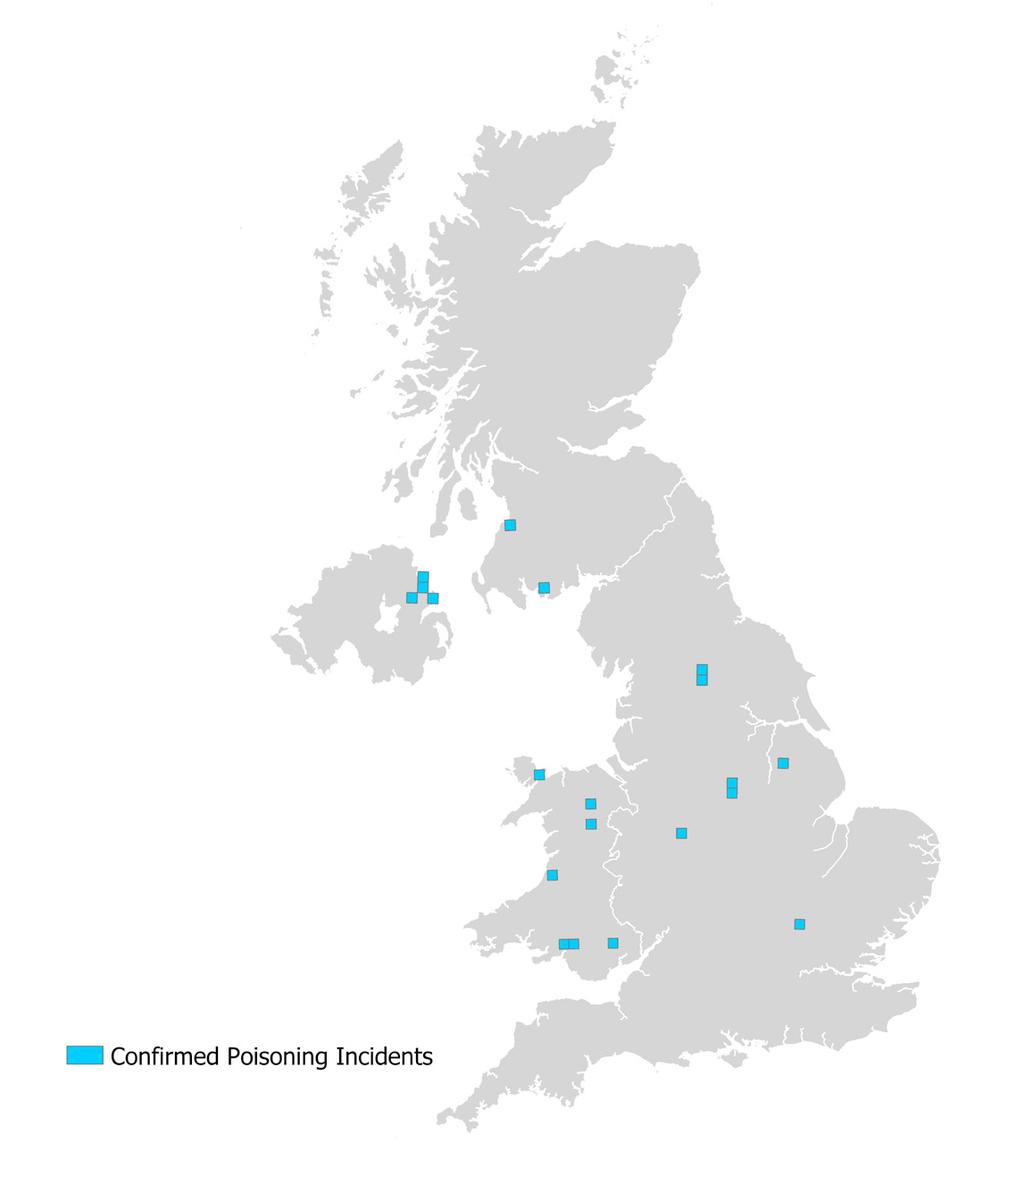 one incident 22 confirmed bird of prey poisoning incidents, mapped to 20 10km grid squares 15 confirmed bird of prey